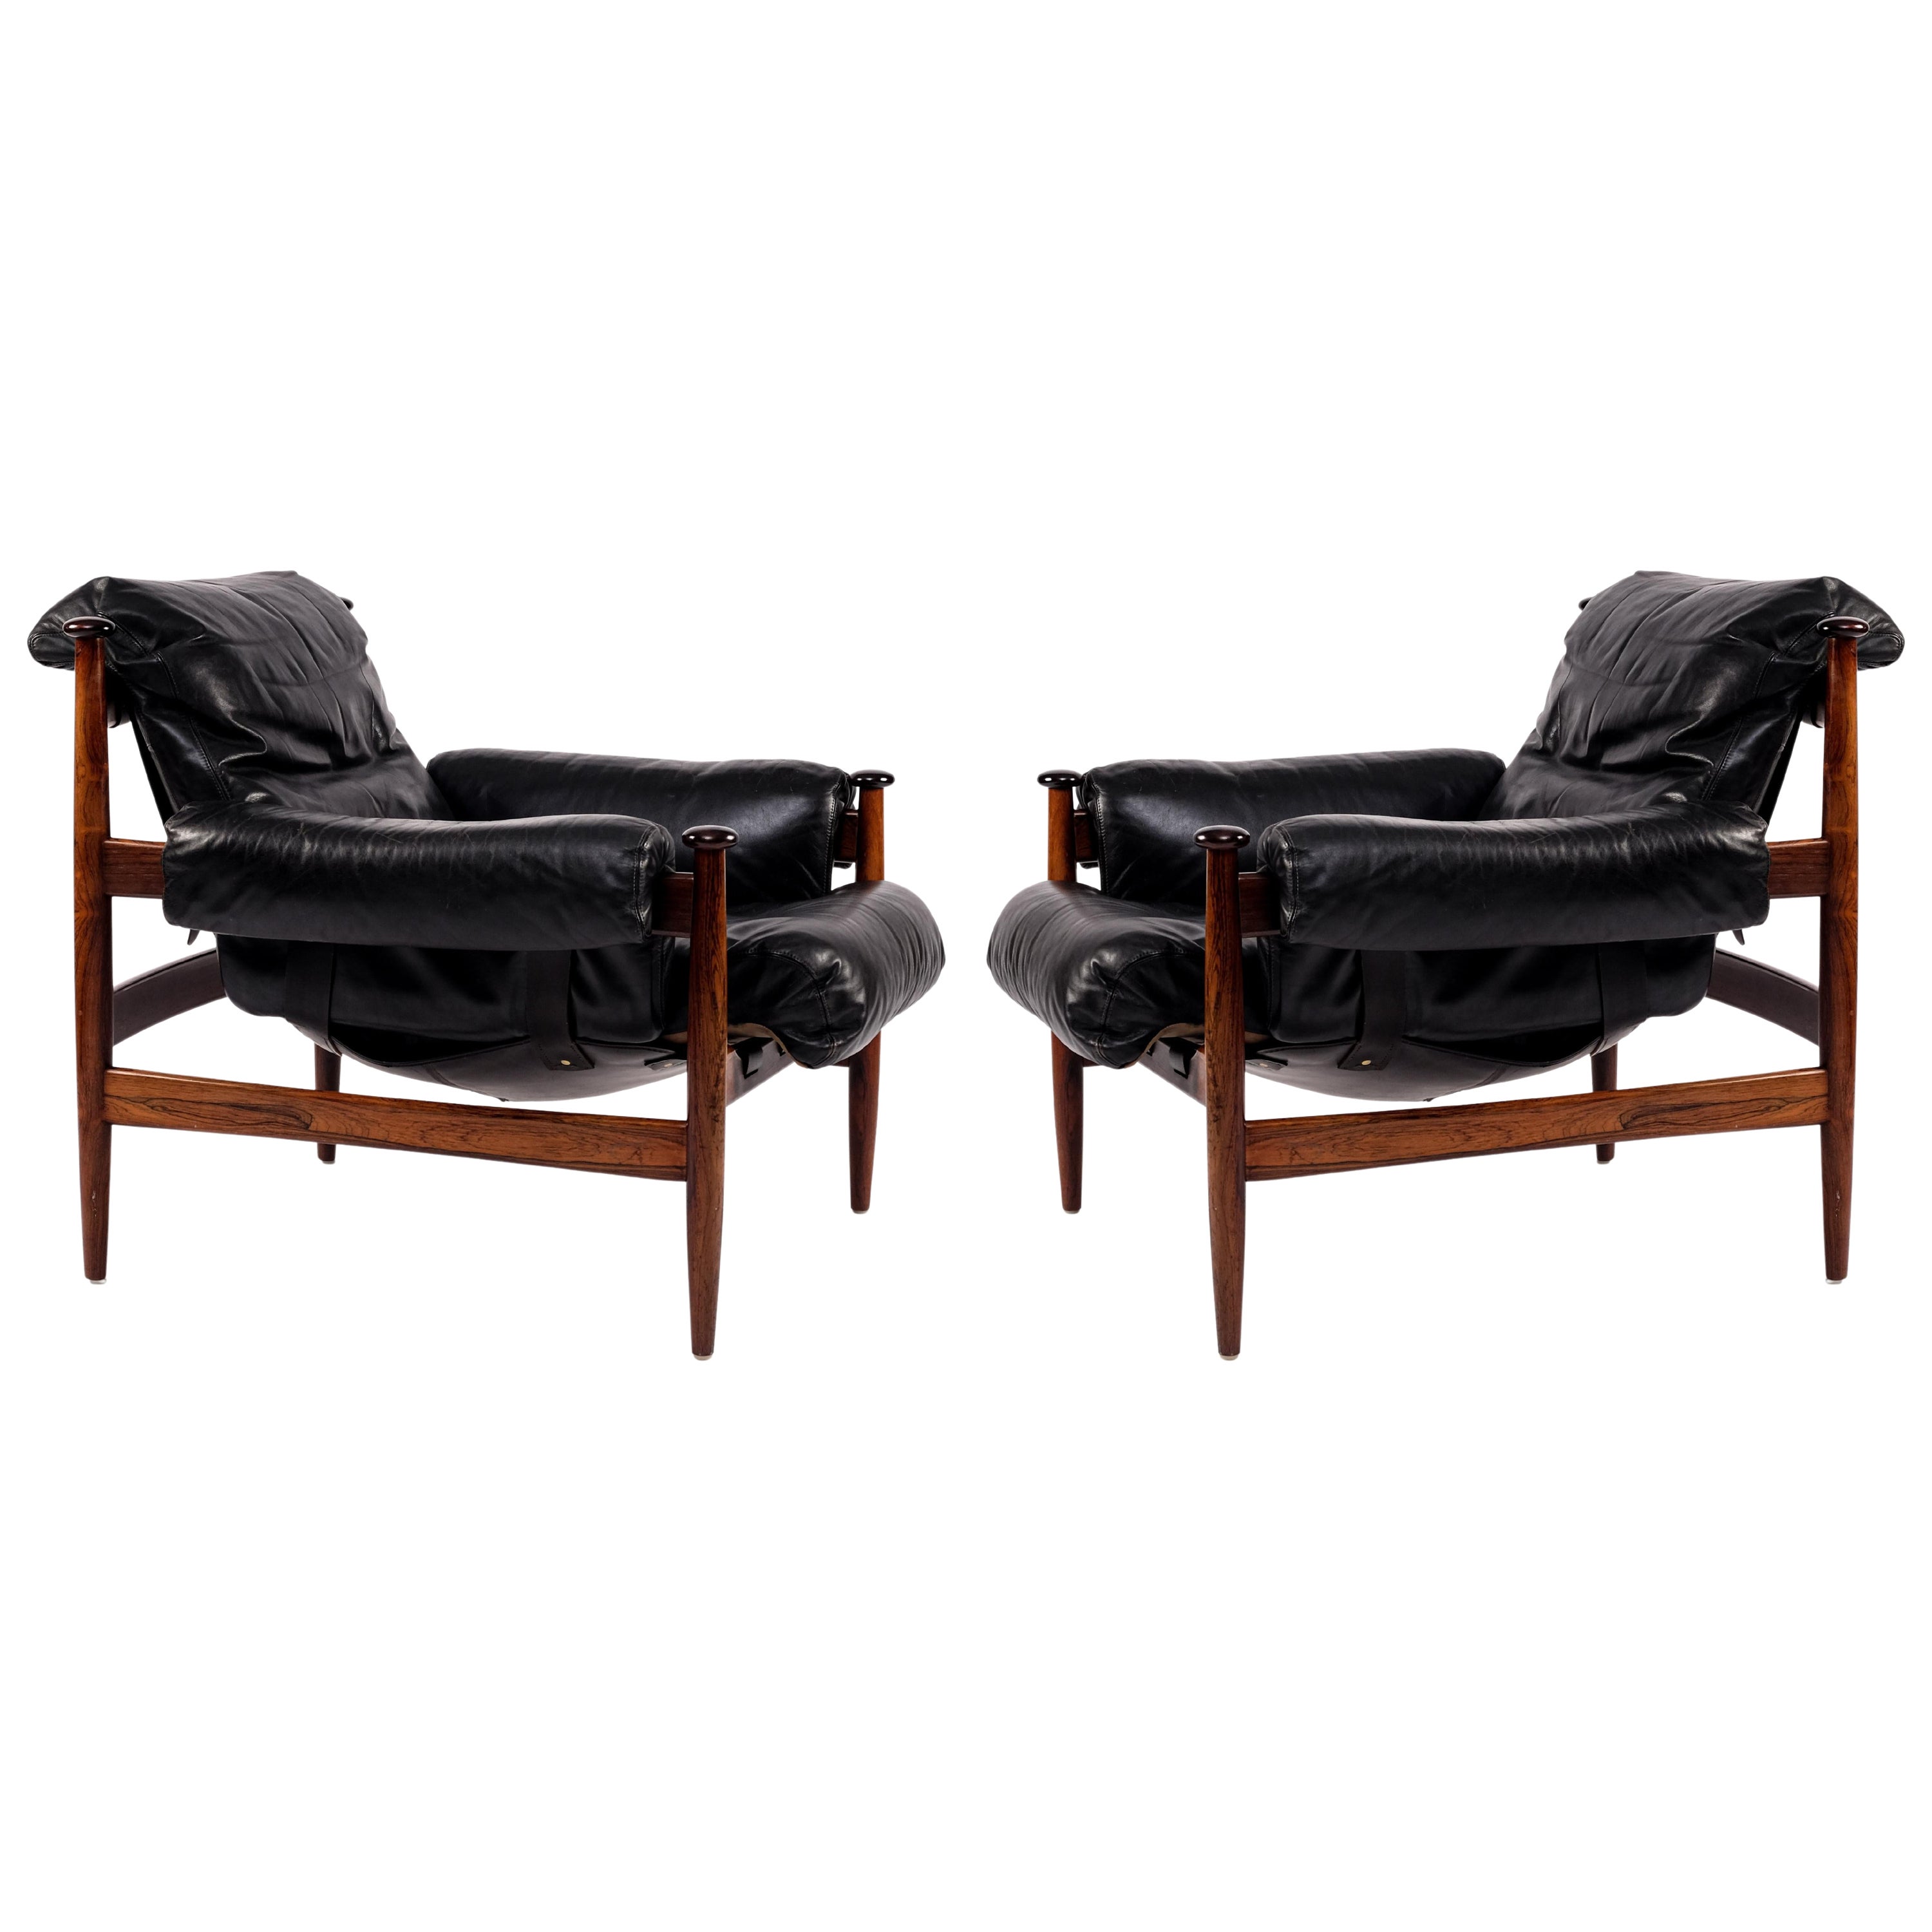 Set of 2 "Amiral" Easy Chairs Designed by Eric Merthen, 1960s